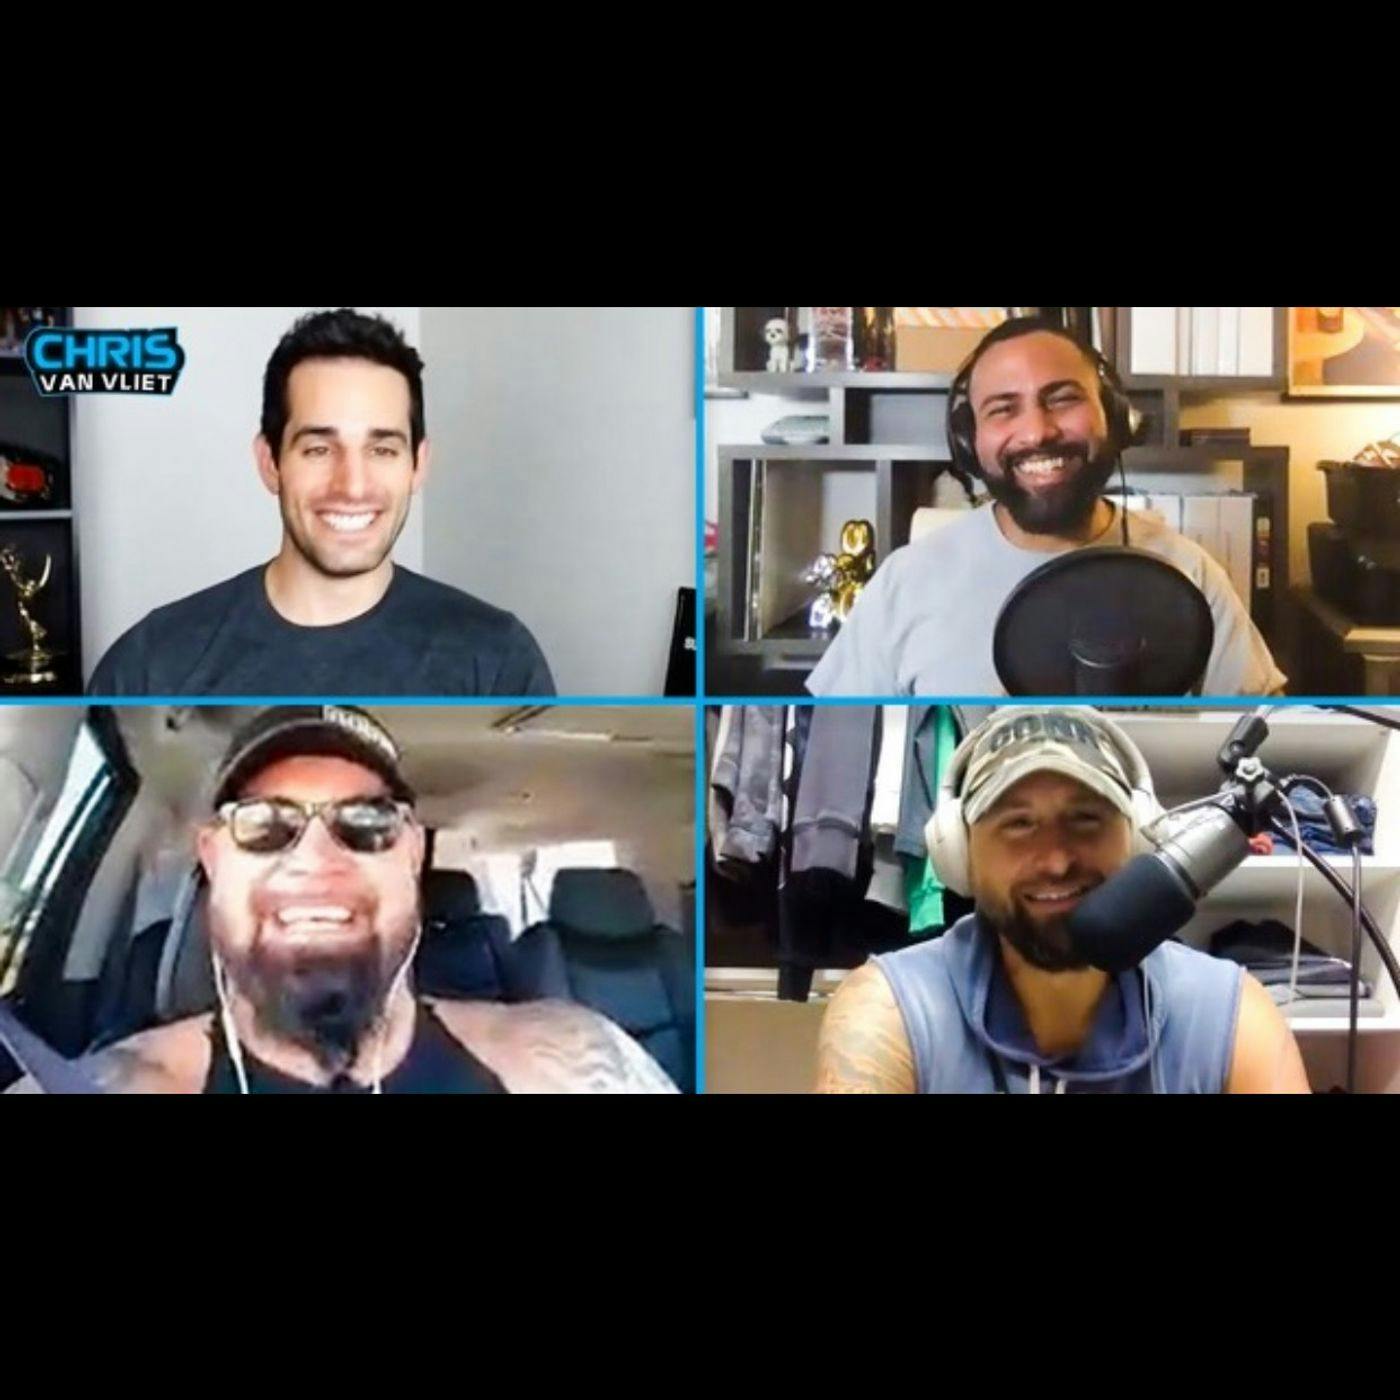 Gallows, Anderson & Rocky Romero: The Talk'n Shop podcast drops by for a hilarious hangout